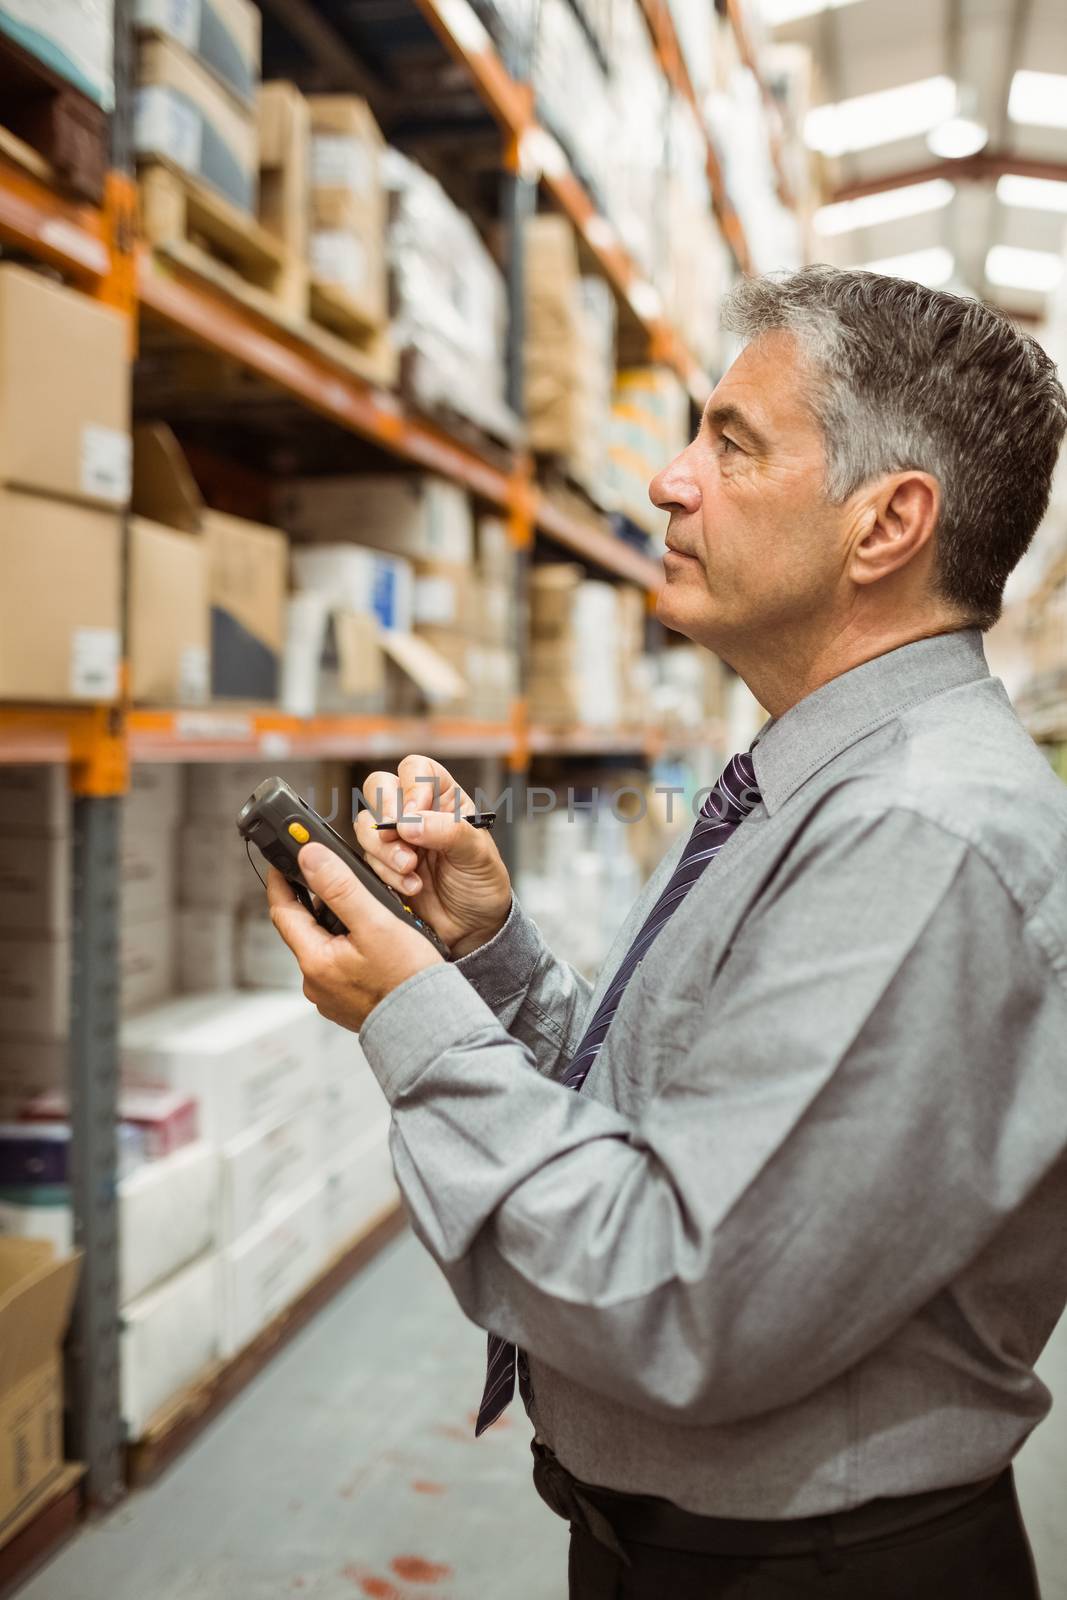 Focused male manager using handheld in a large warehouse